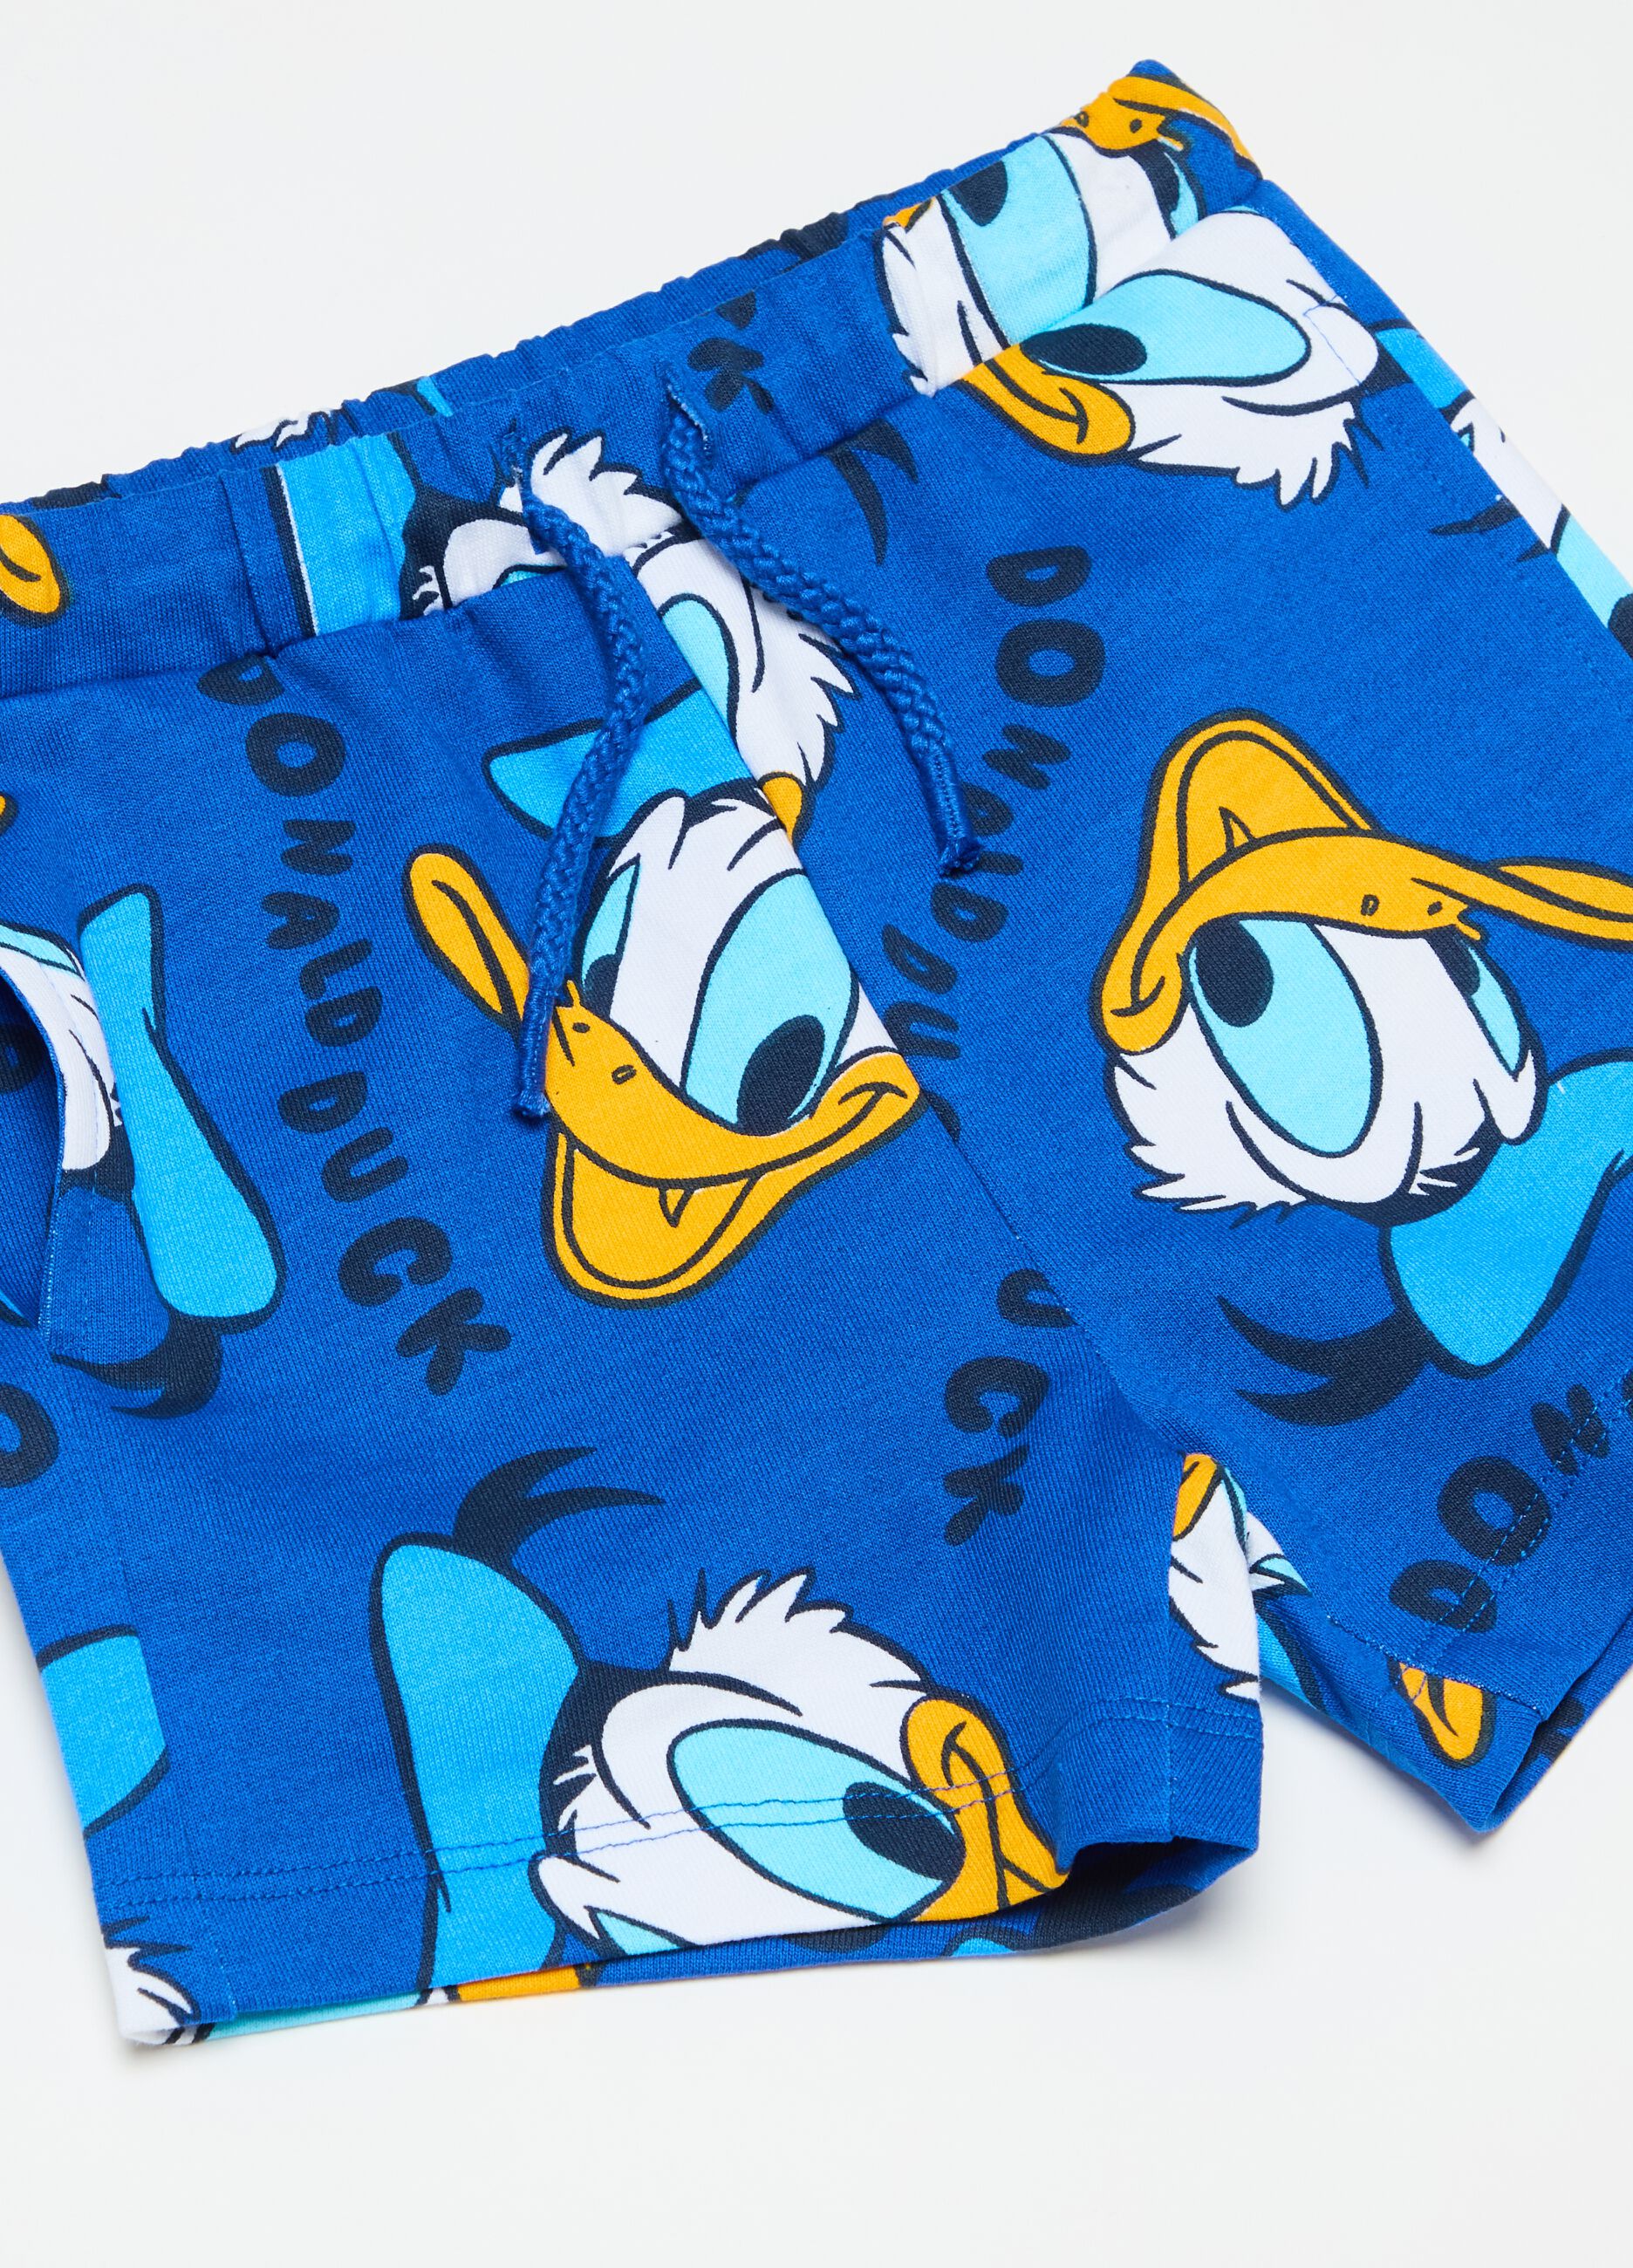 Cotton Bermuda shorts with Donald Duck 90 print